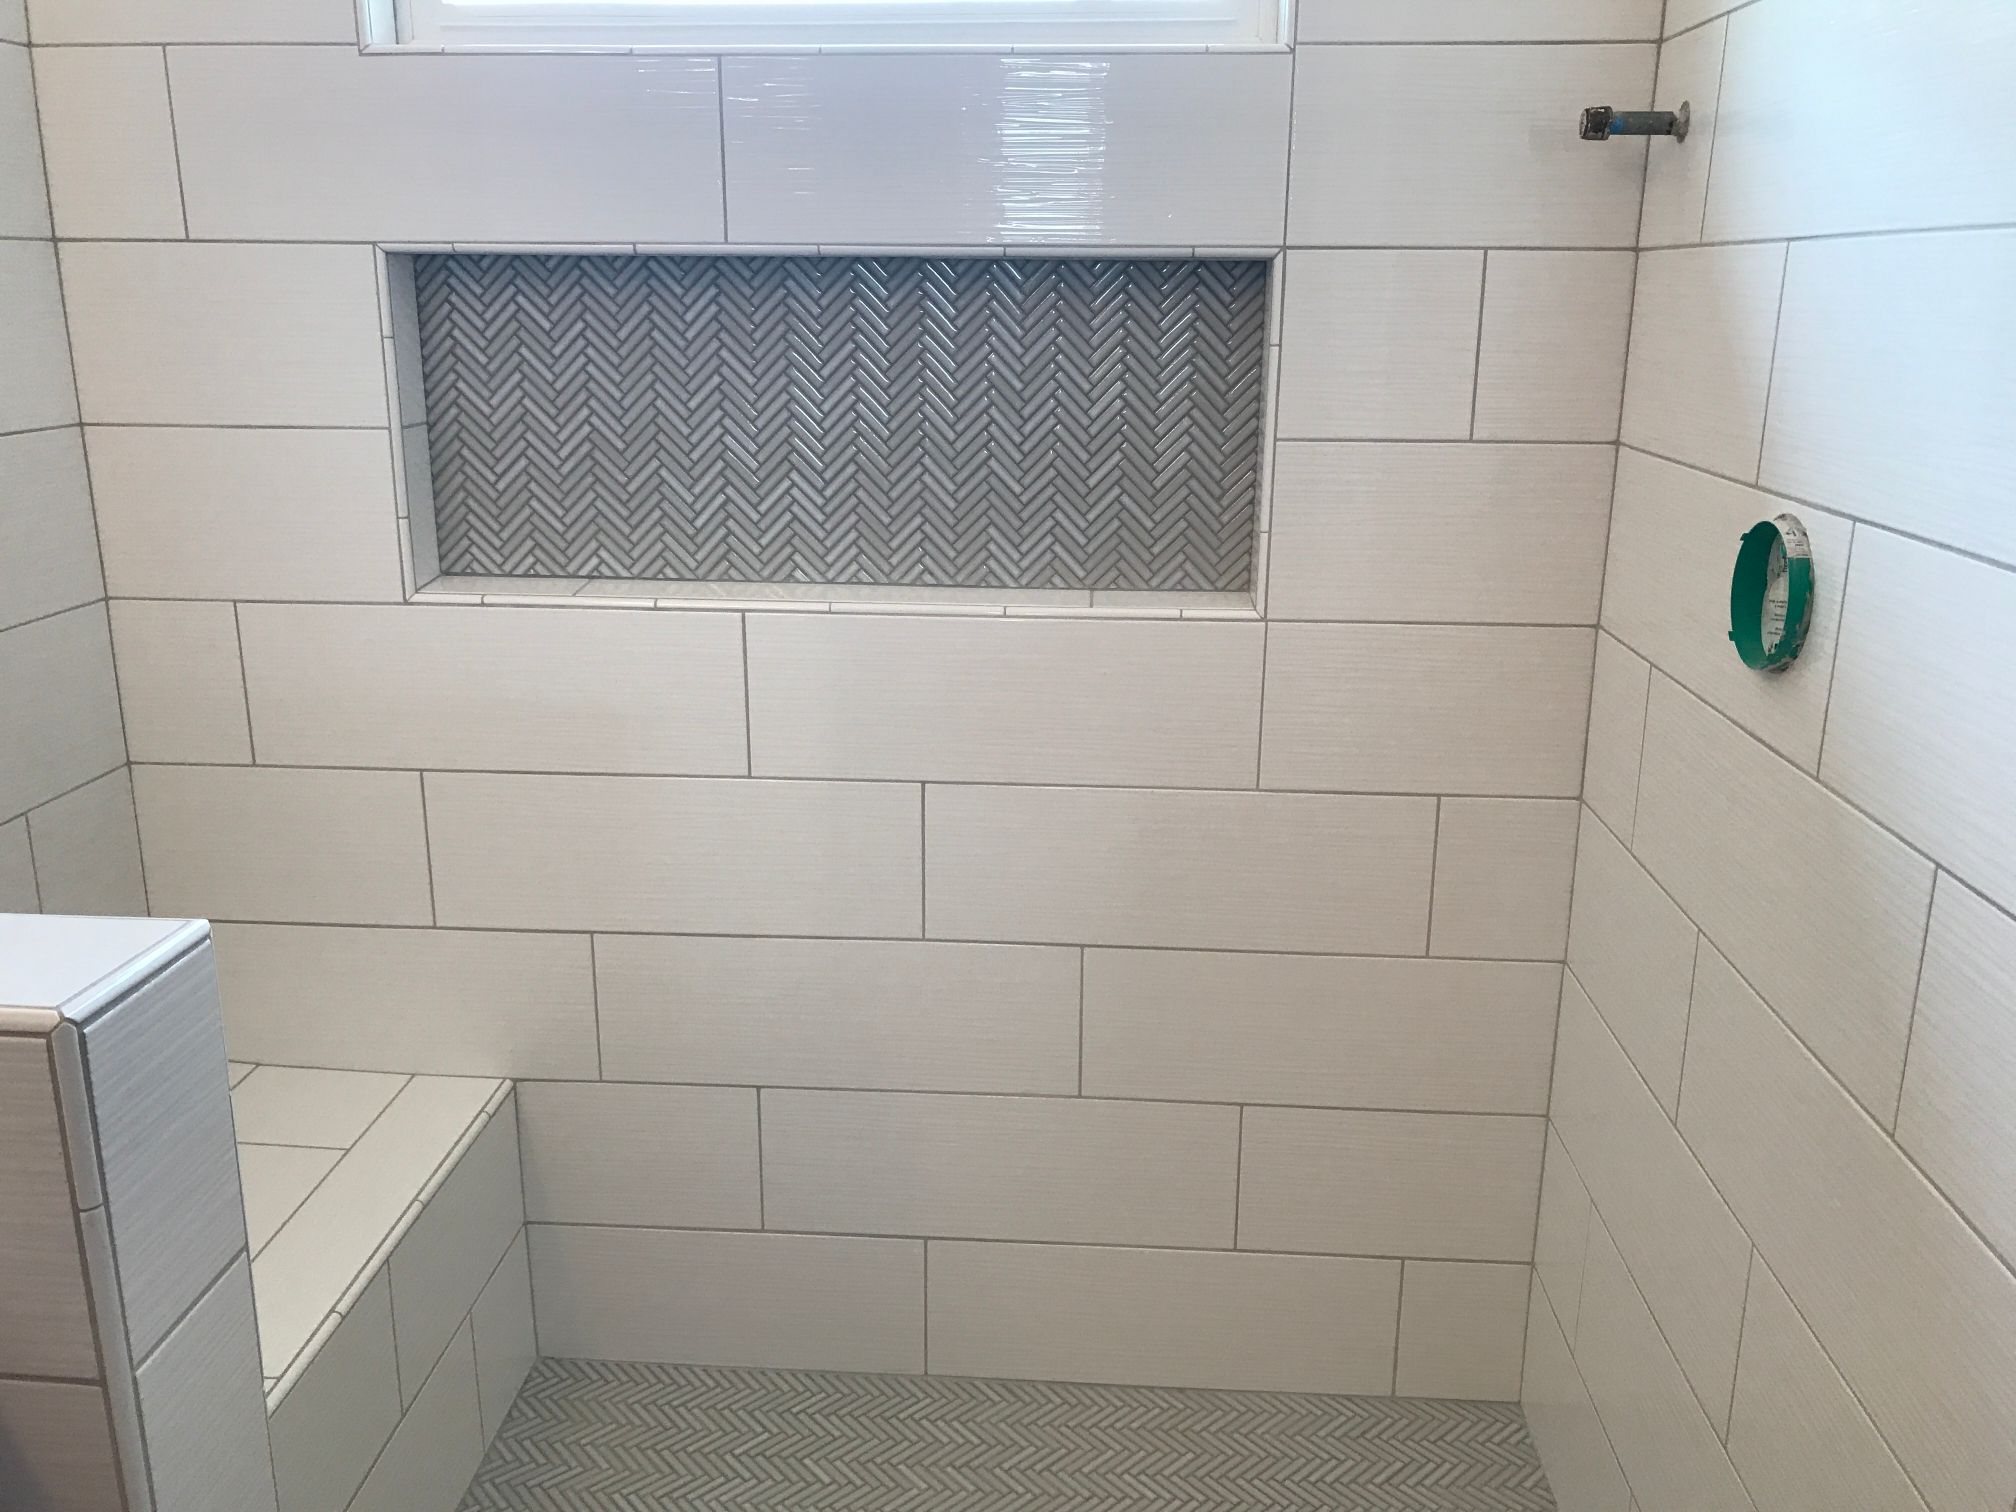 Herringbone pattern on custom tile shower shelf and floor with a bench seat.